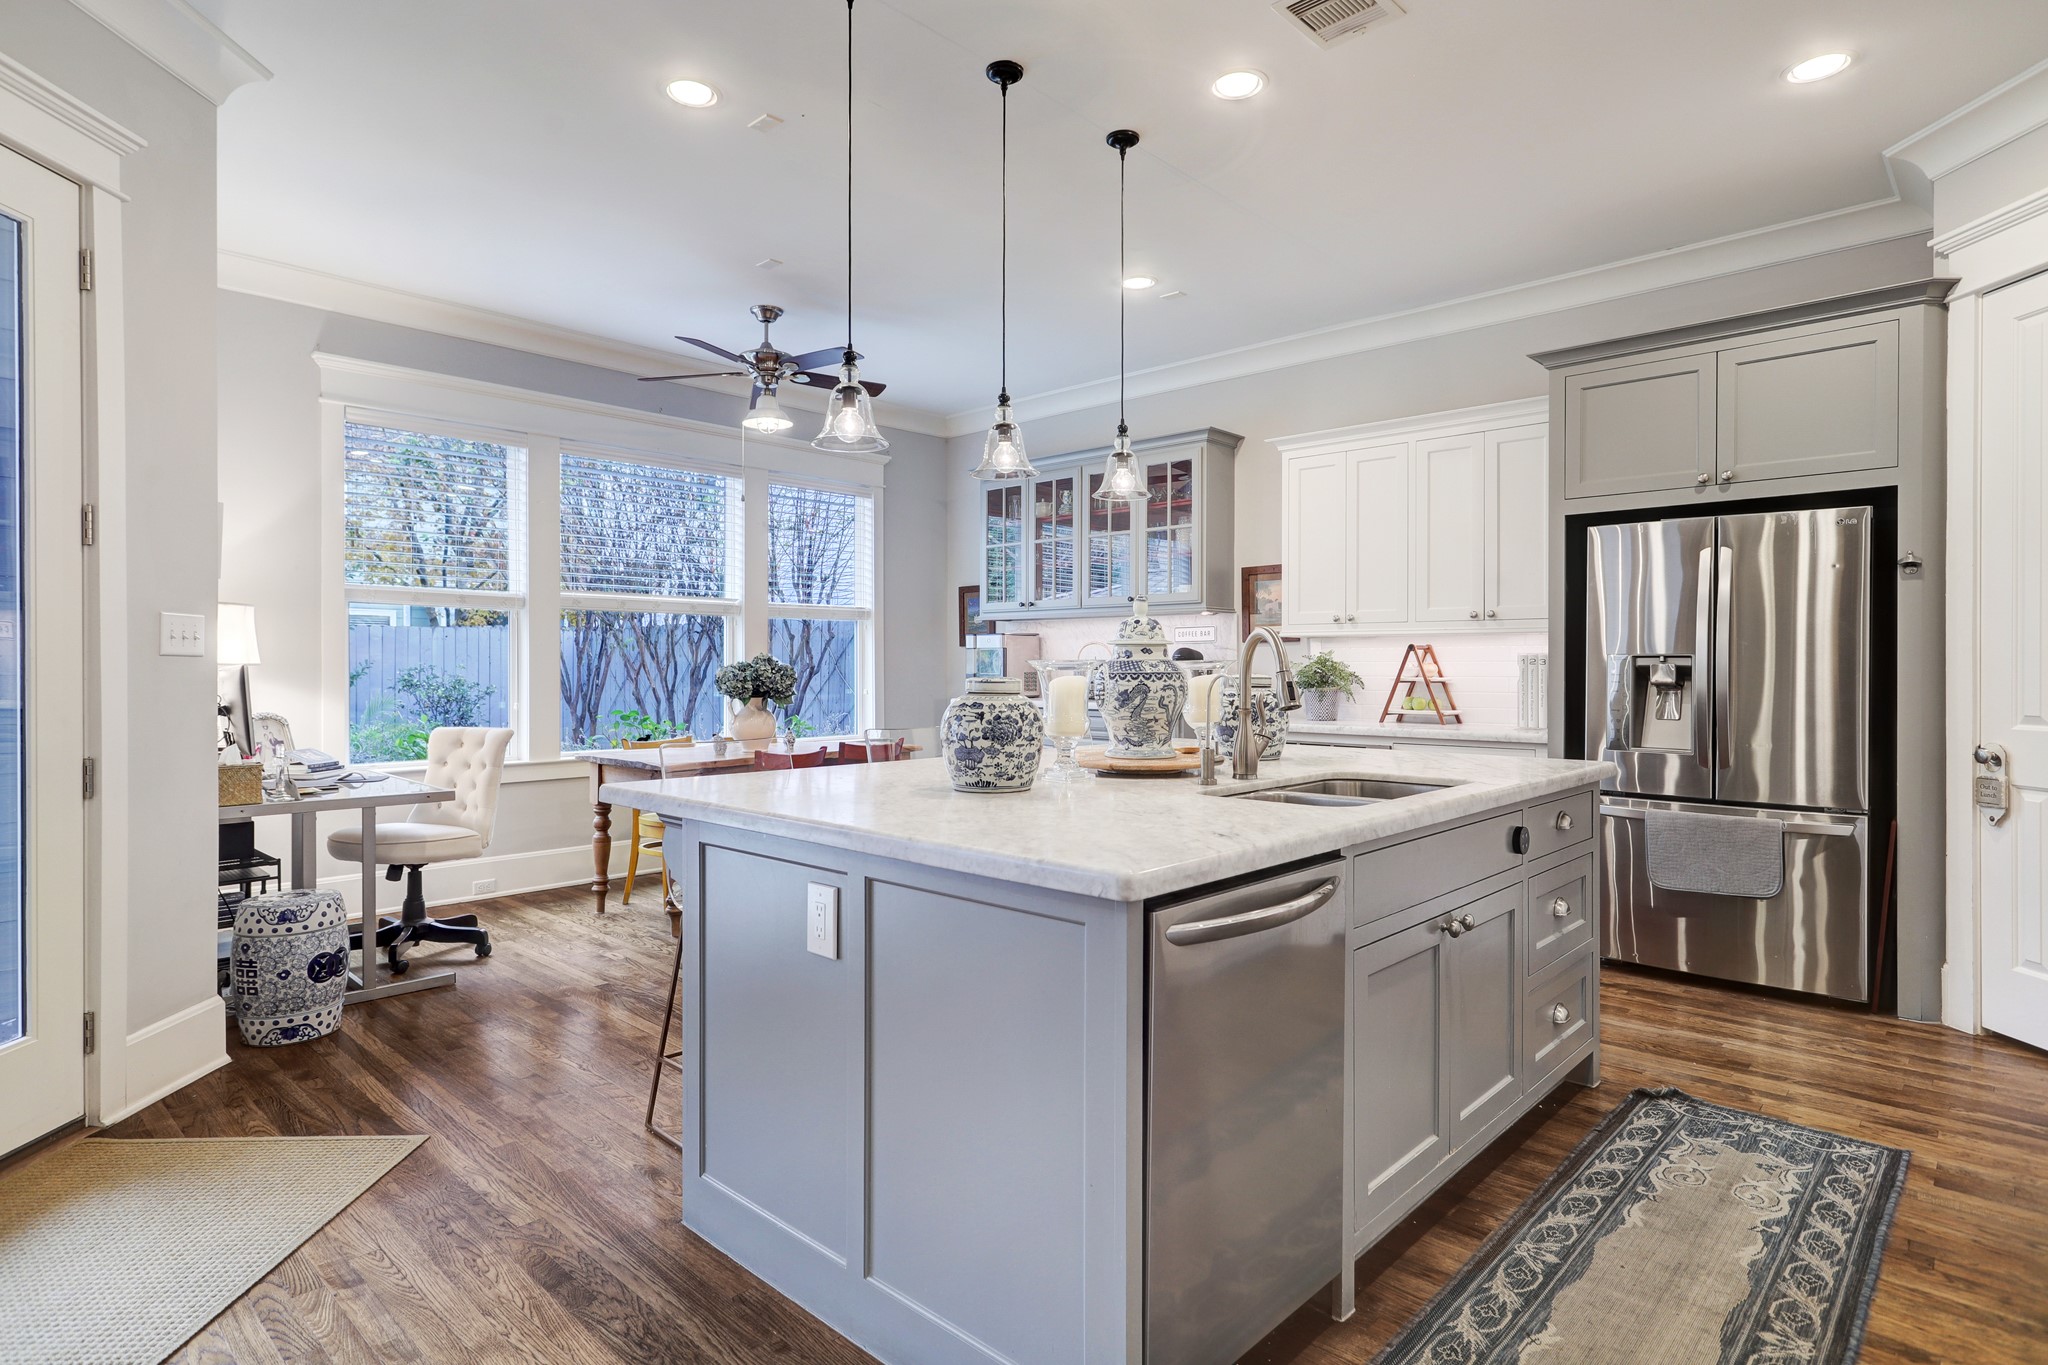 This sizable kitchen features elegant marble island and counter tops, stainless steel appliances, a walk-in pantry, built-in coffee bar, ample storage space, and plenty of room for a dining table.